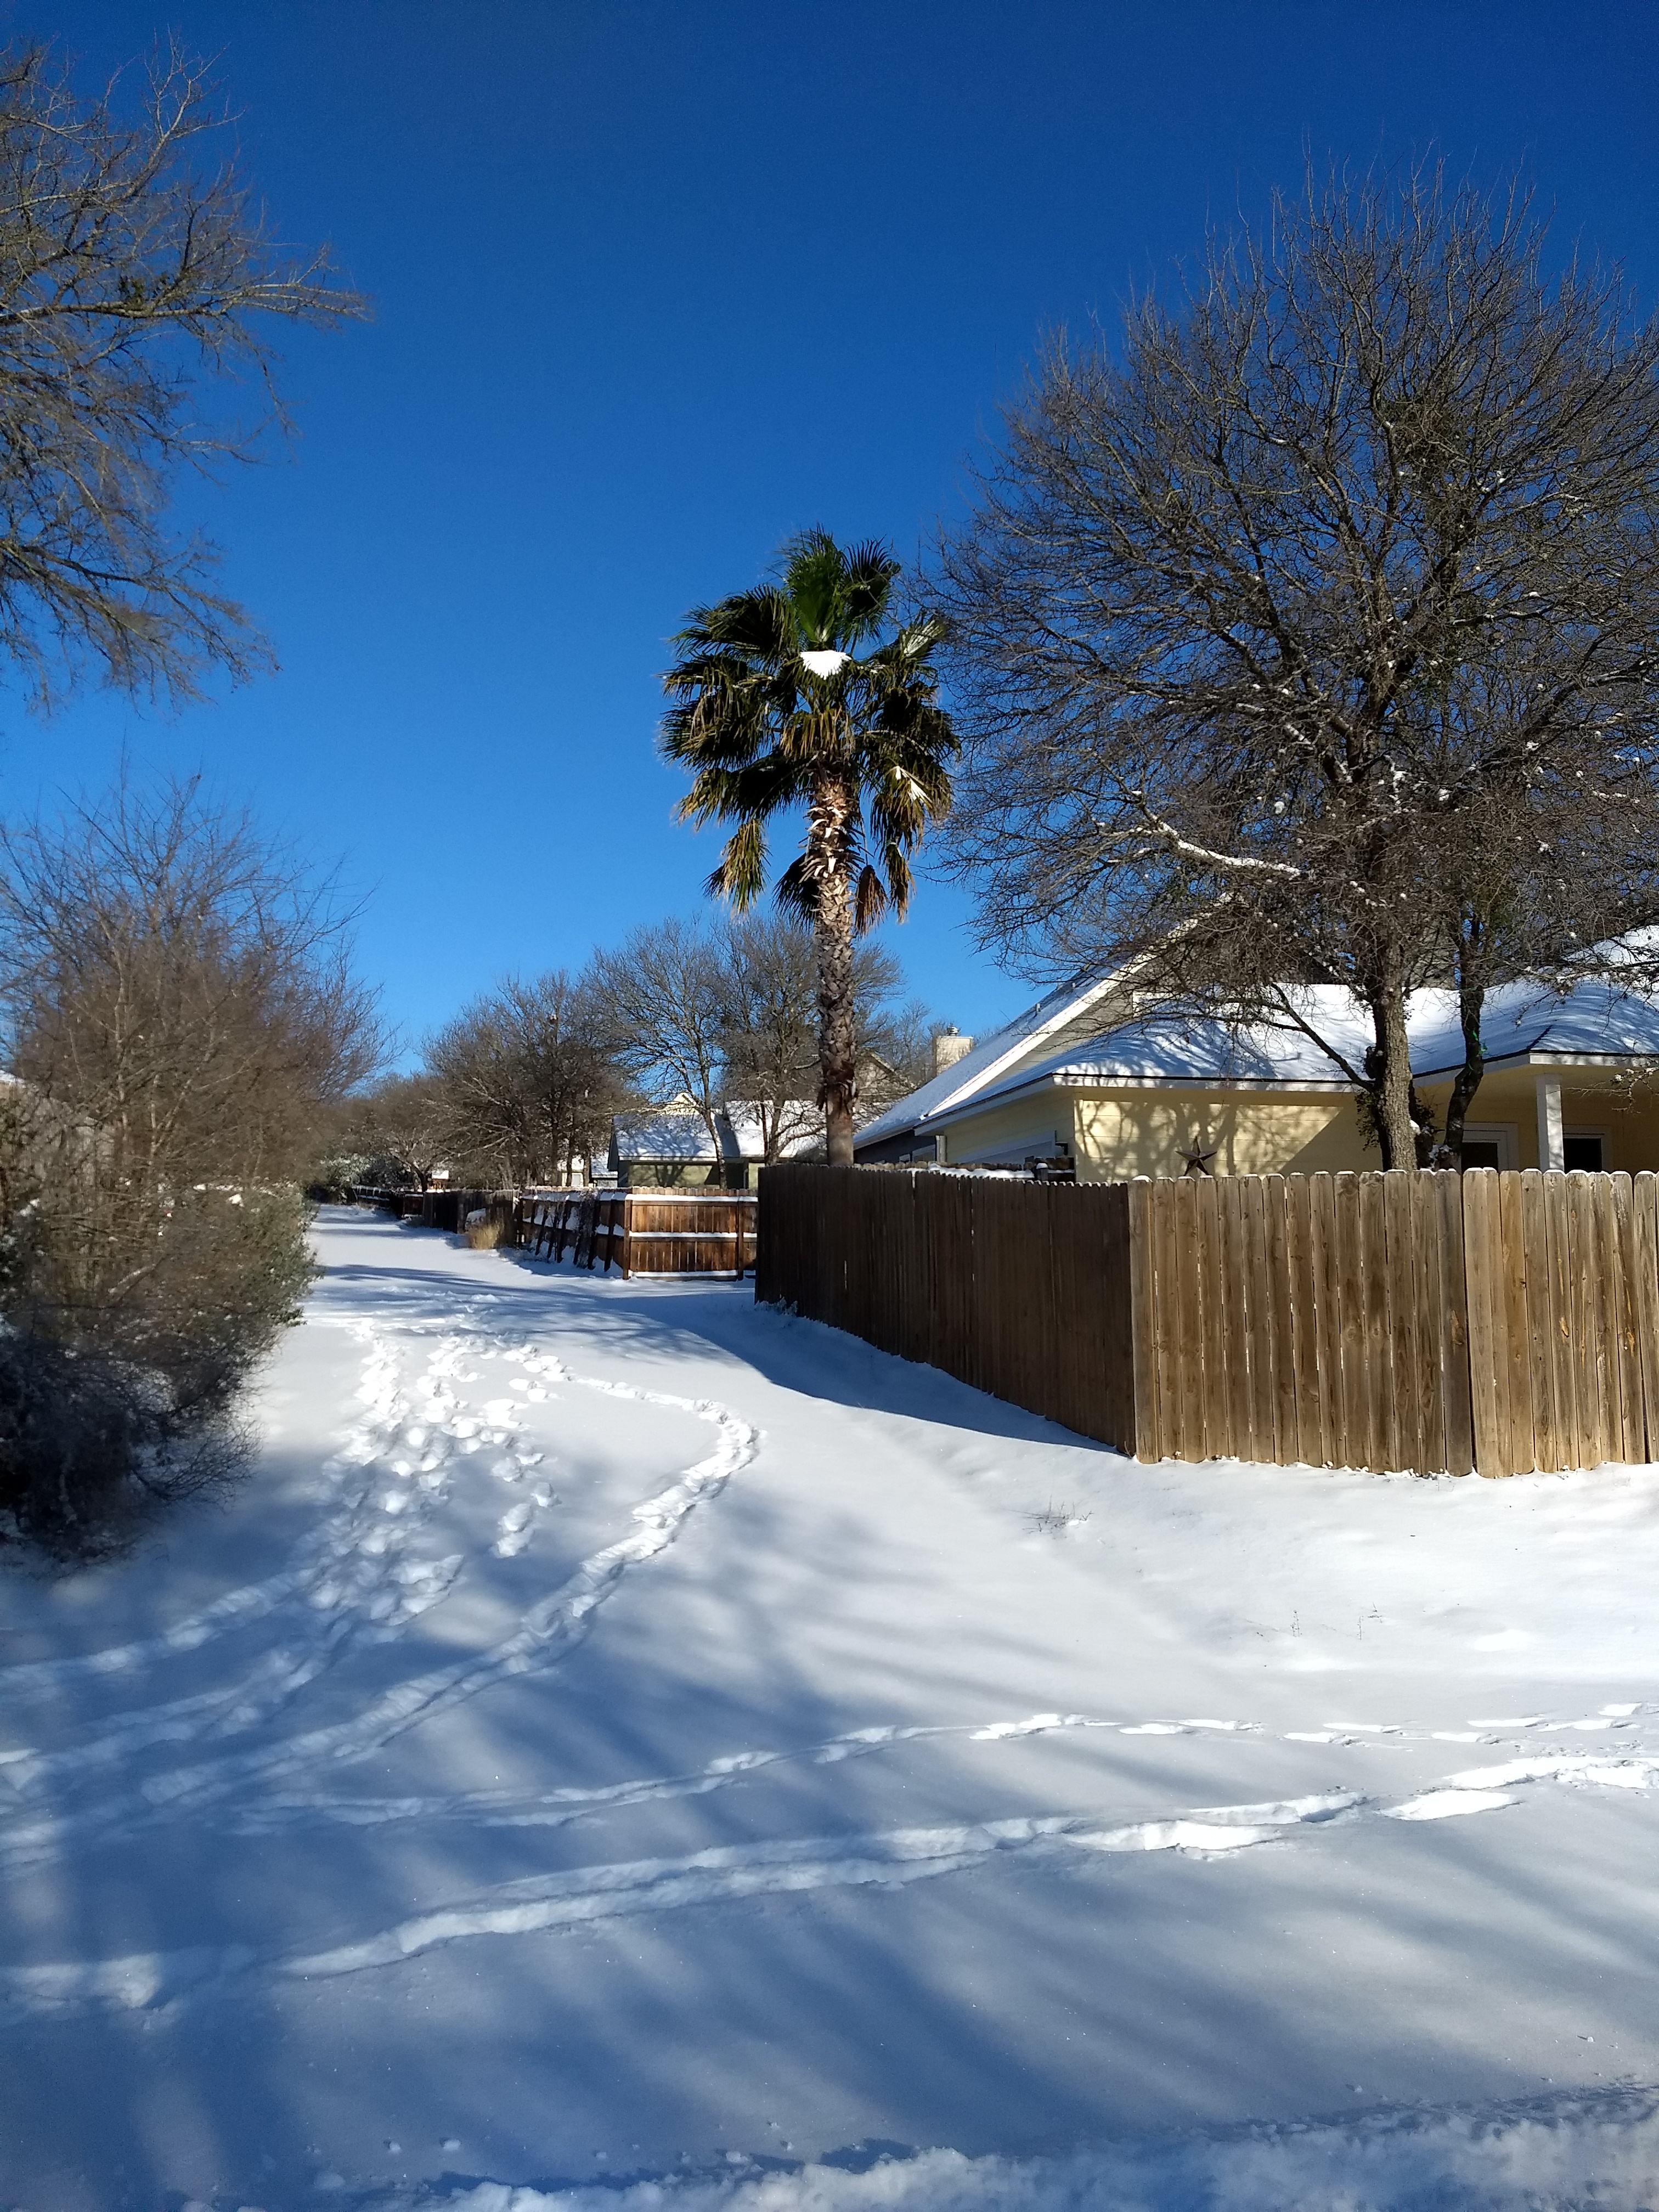 A palm tree covered in snow